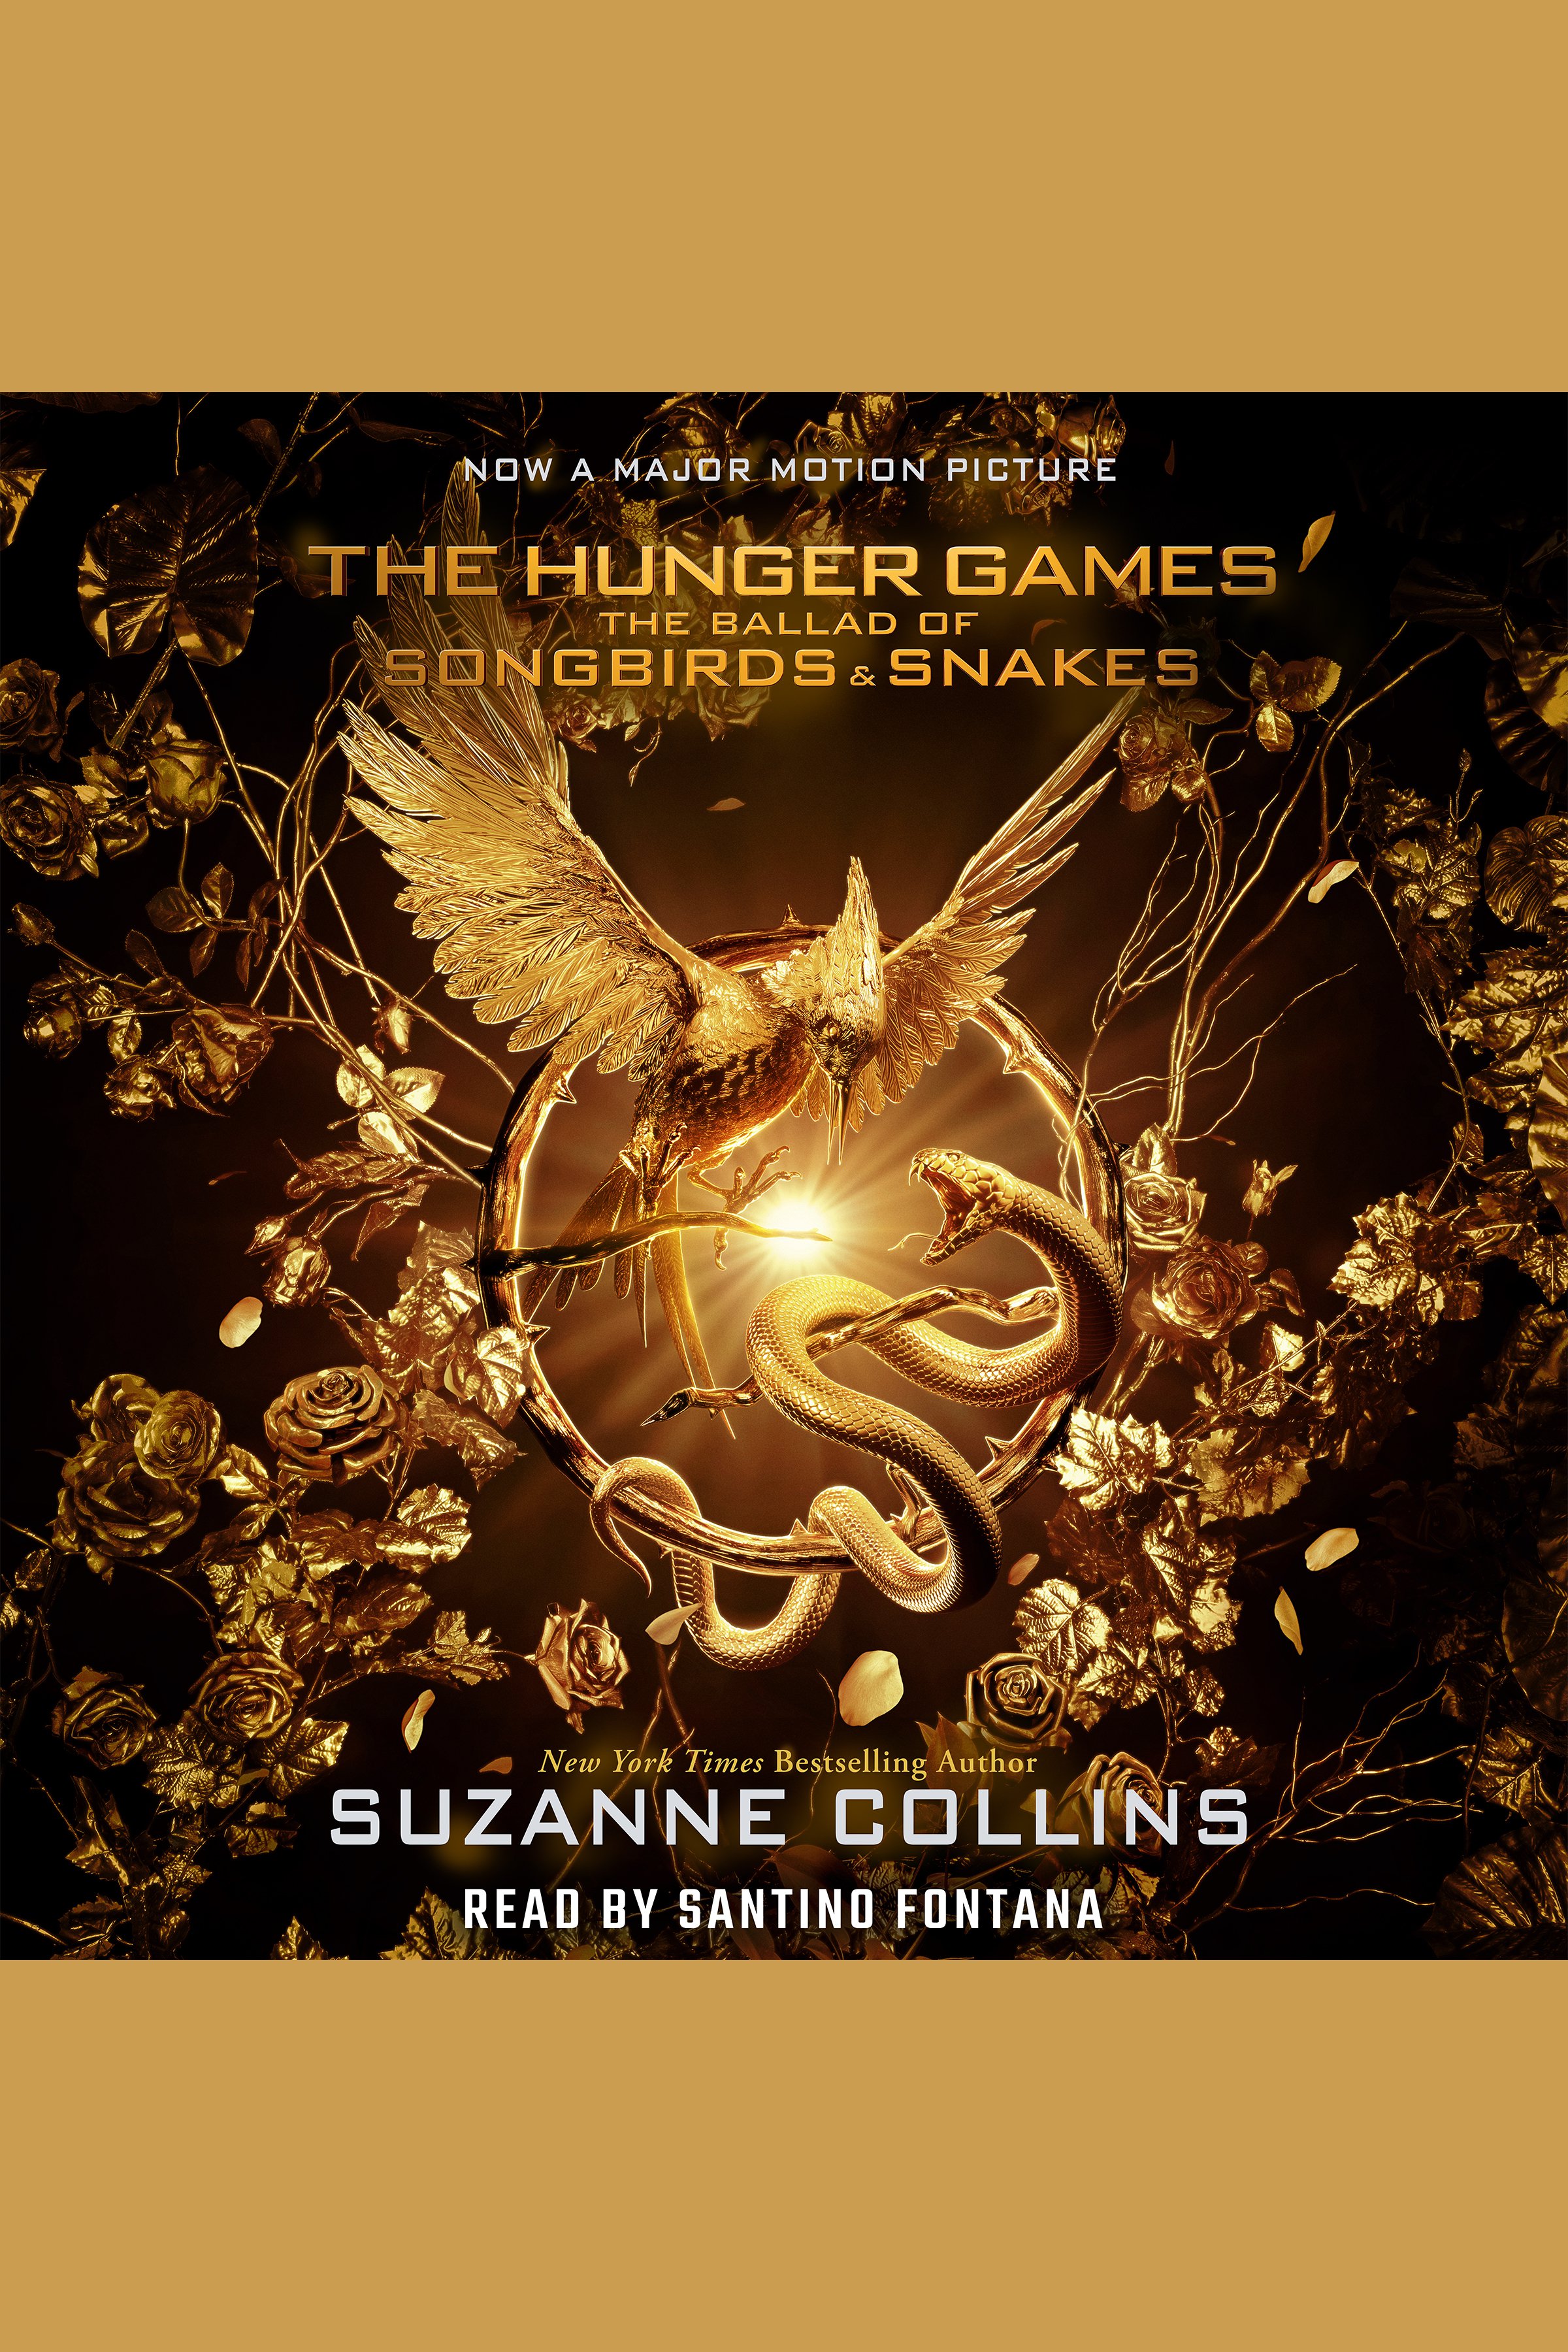 The ballad of songbirds and snakes a Hunger Games novel cover image